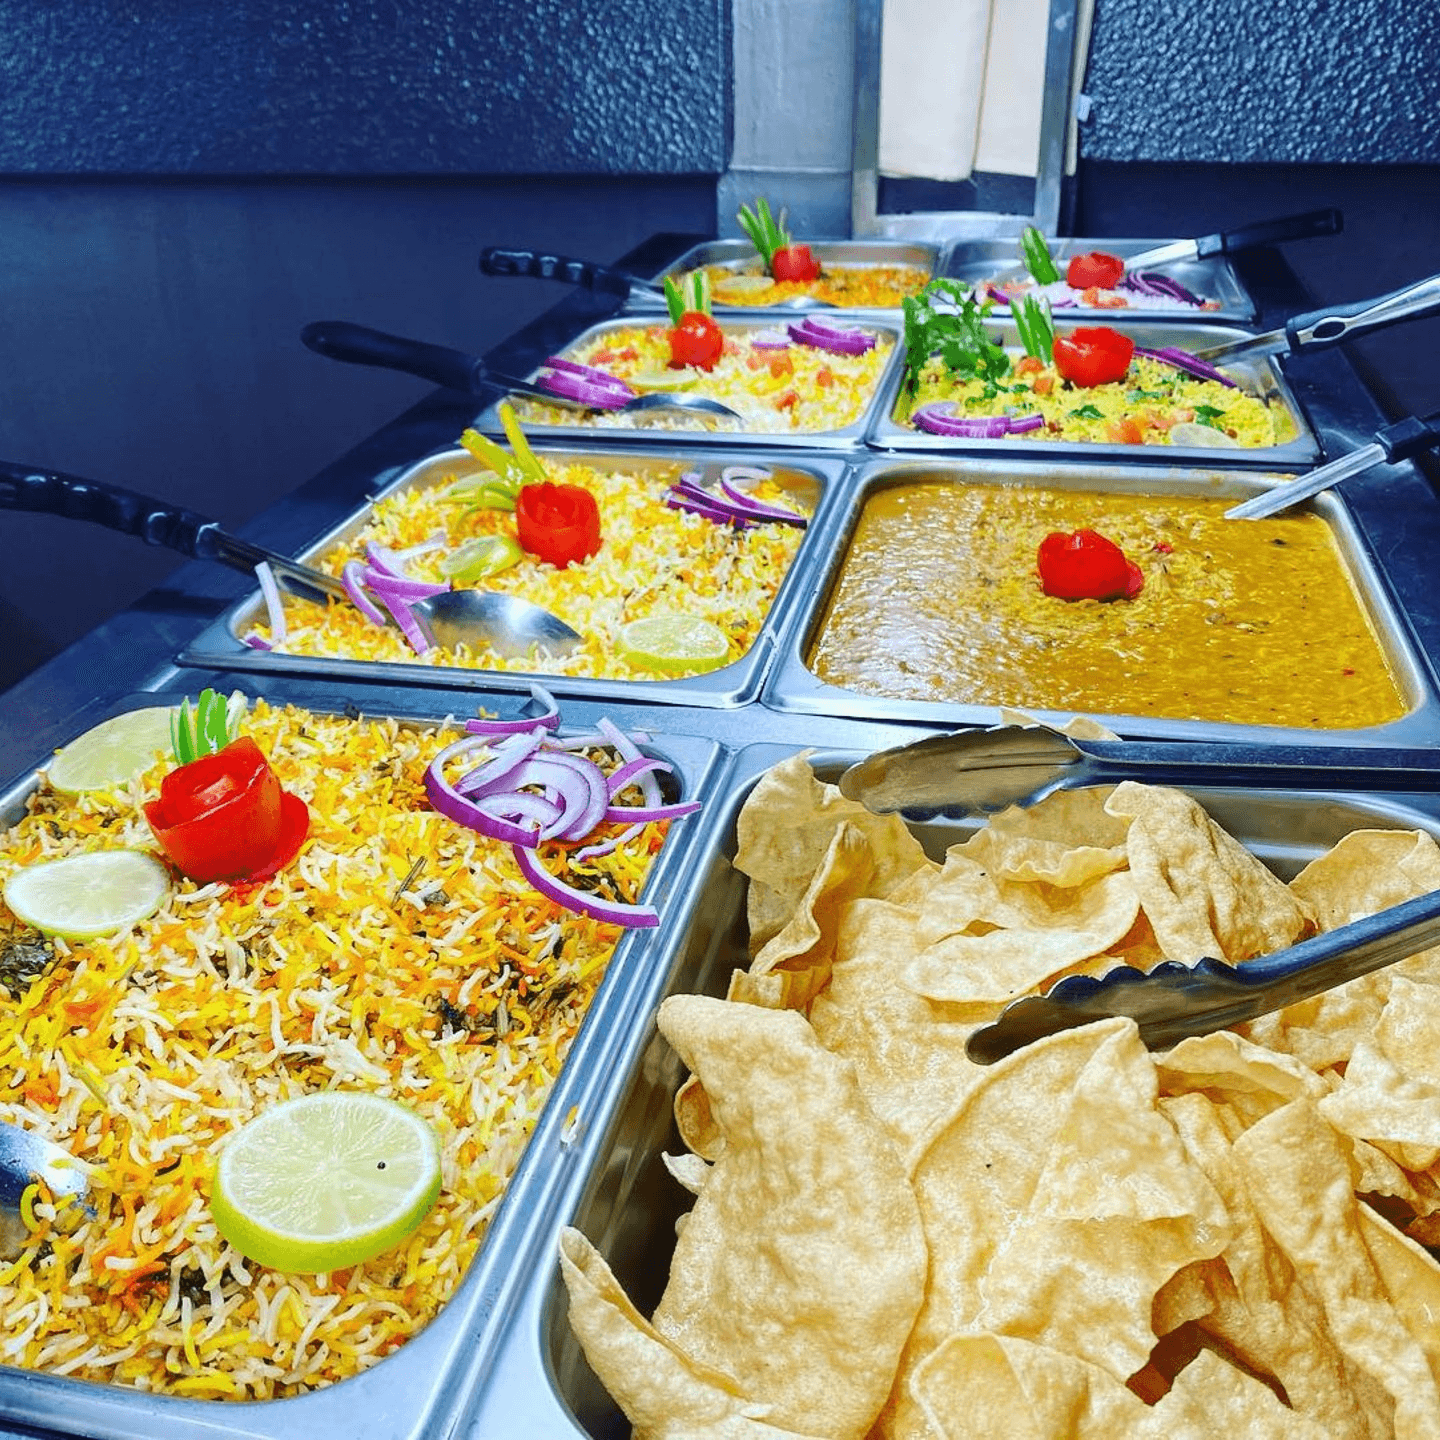 We Cater Too!